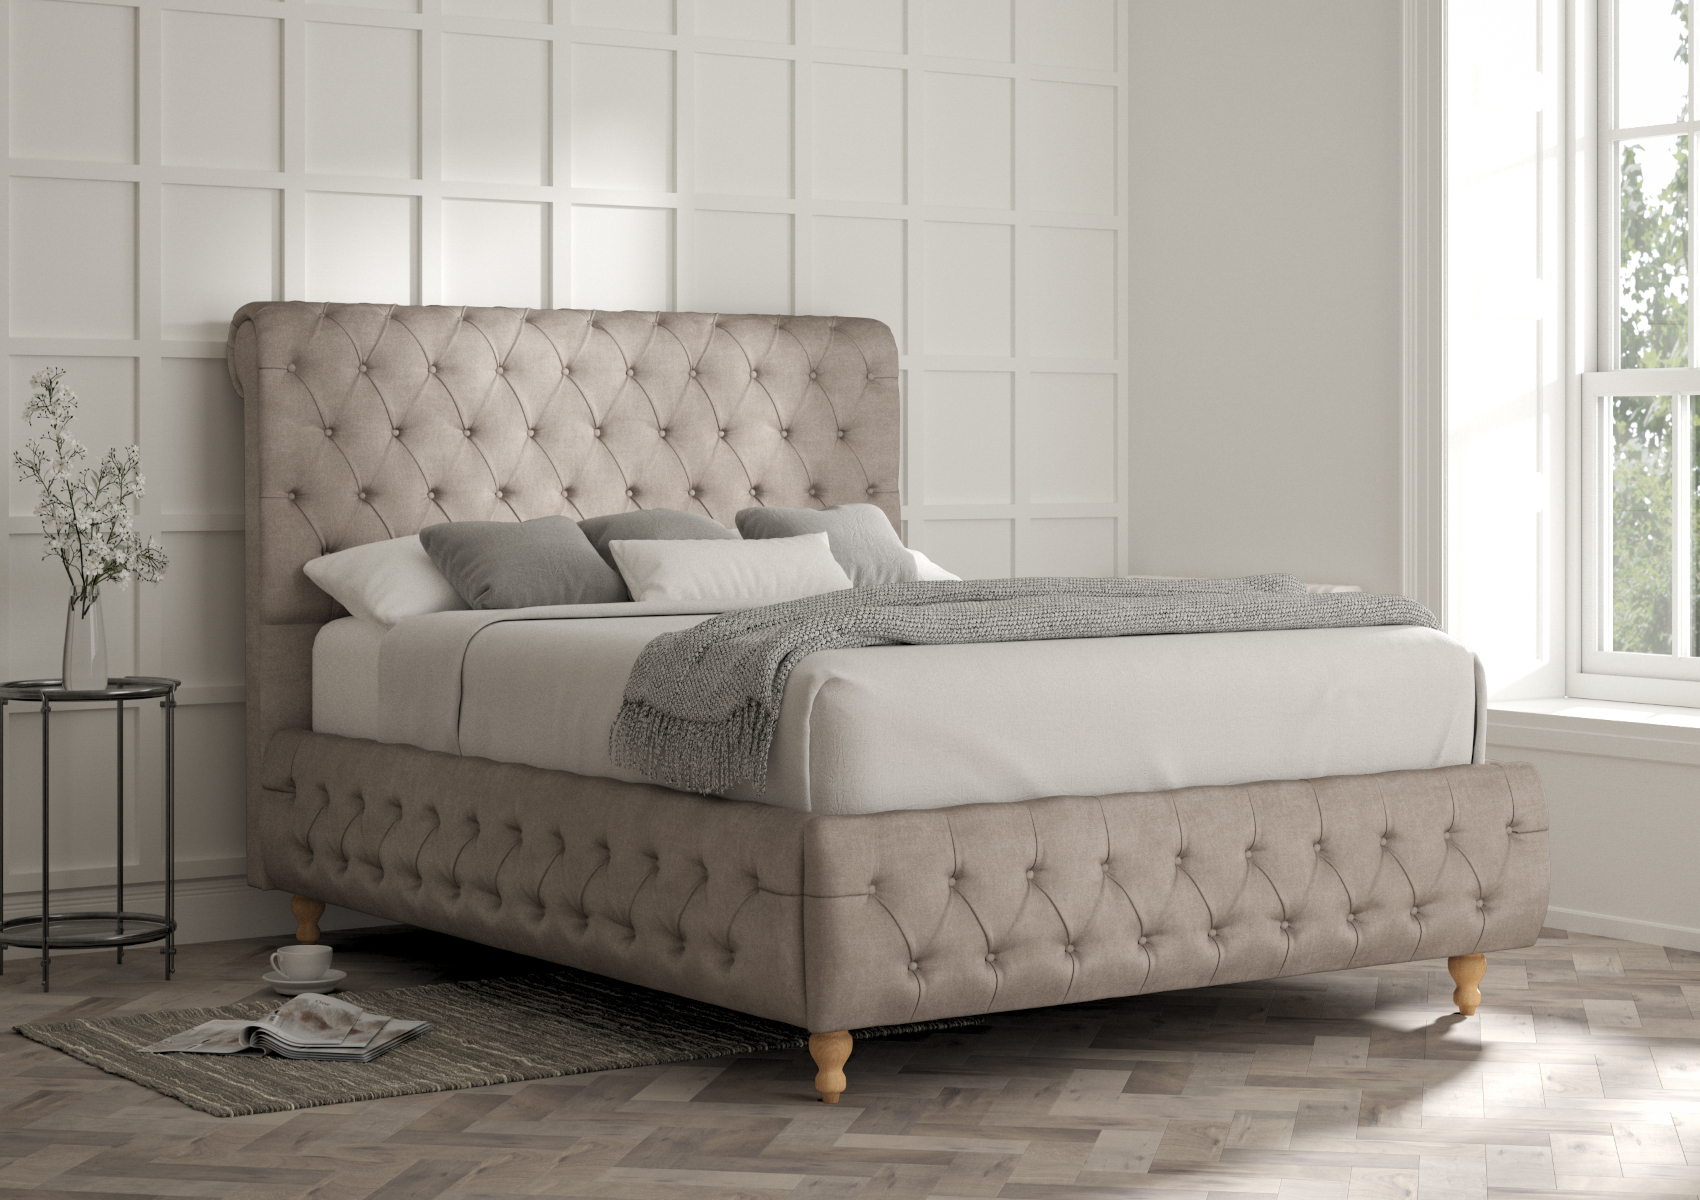 View Billy Arran Natural Upholstered Single Bed Time4Sleep information